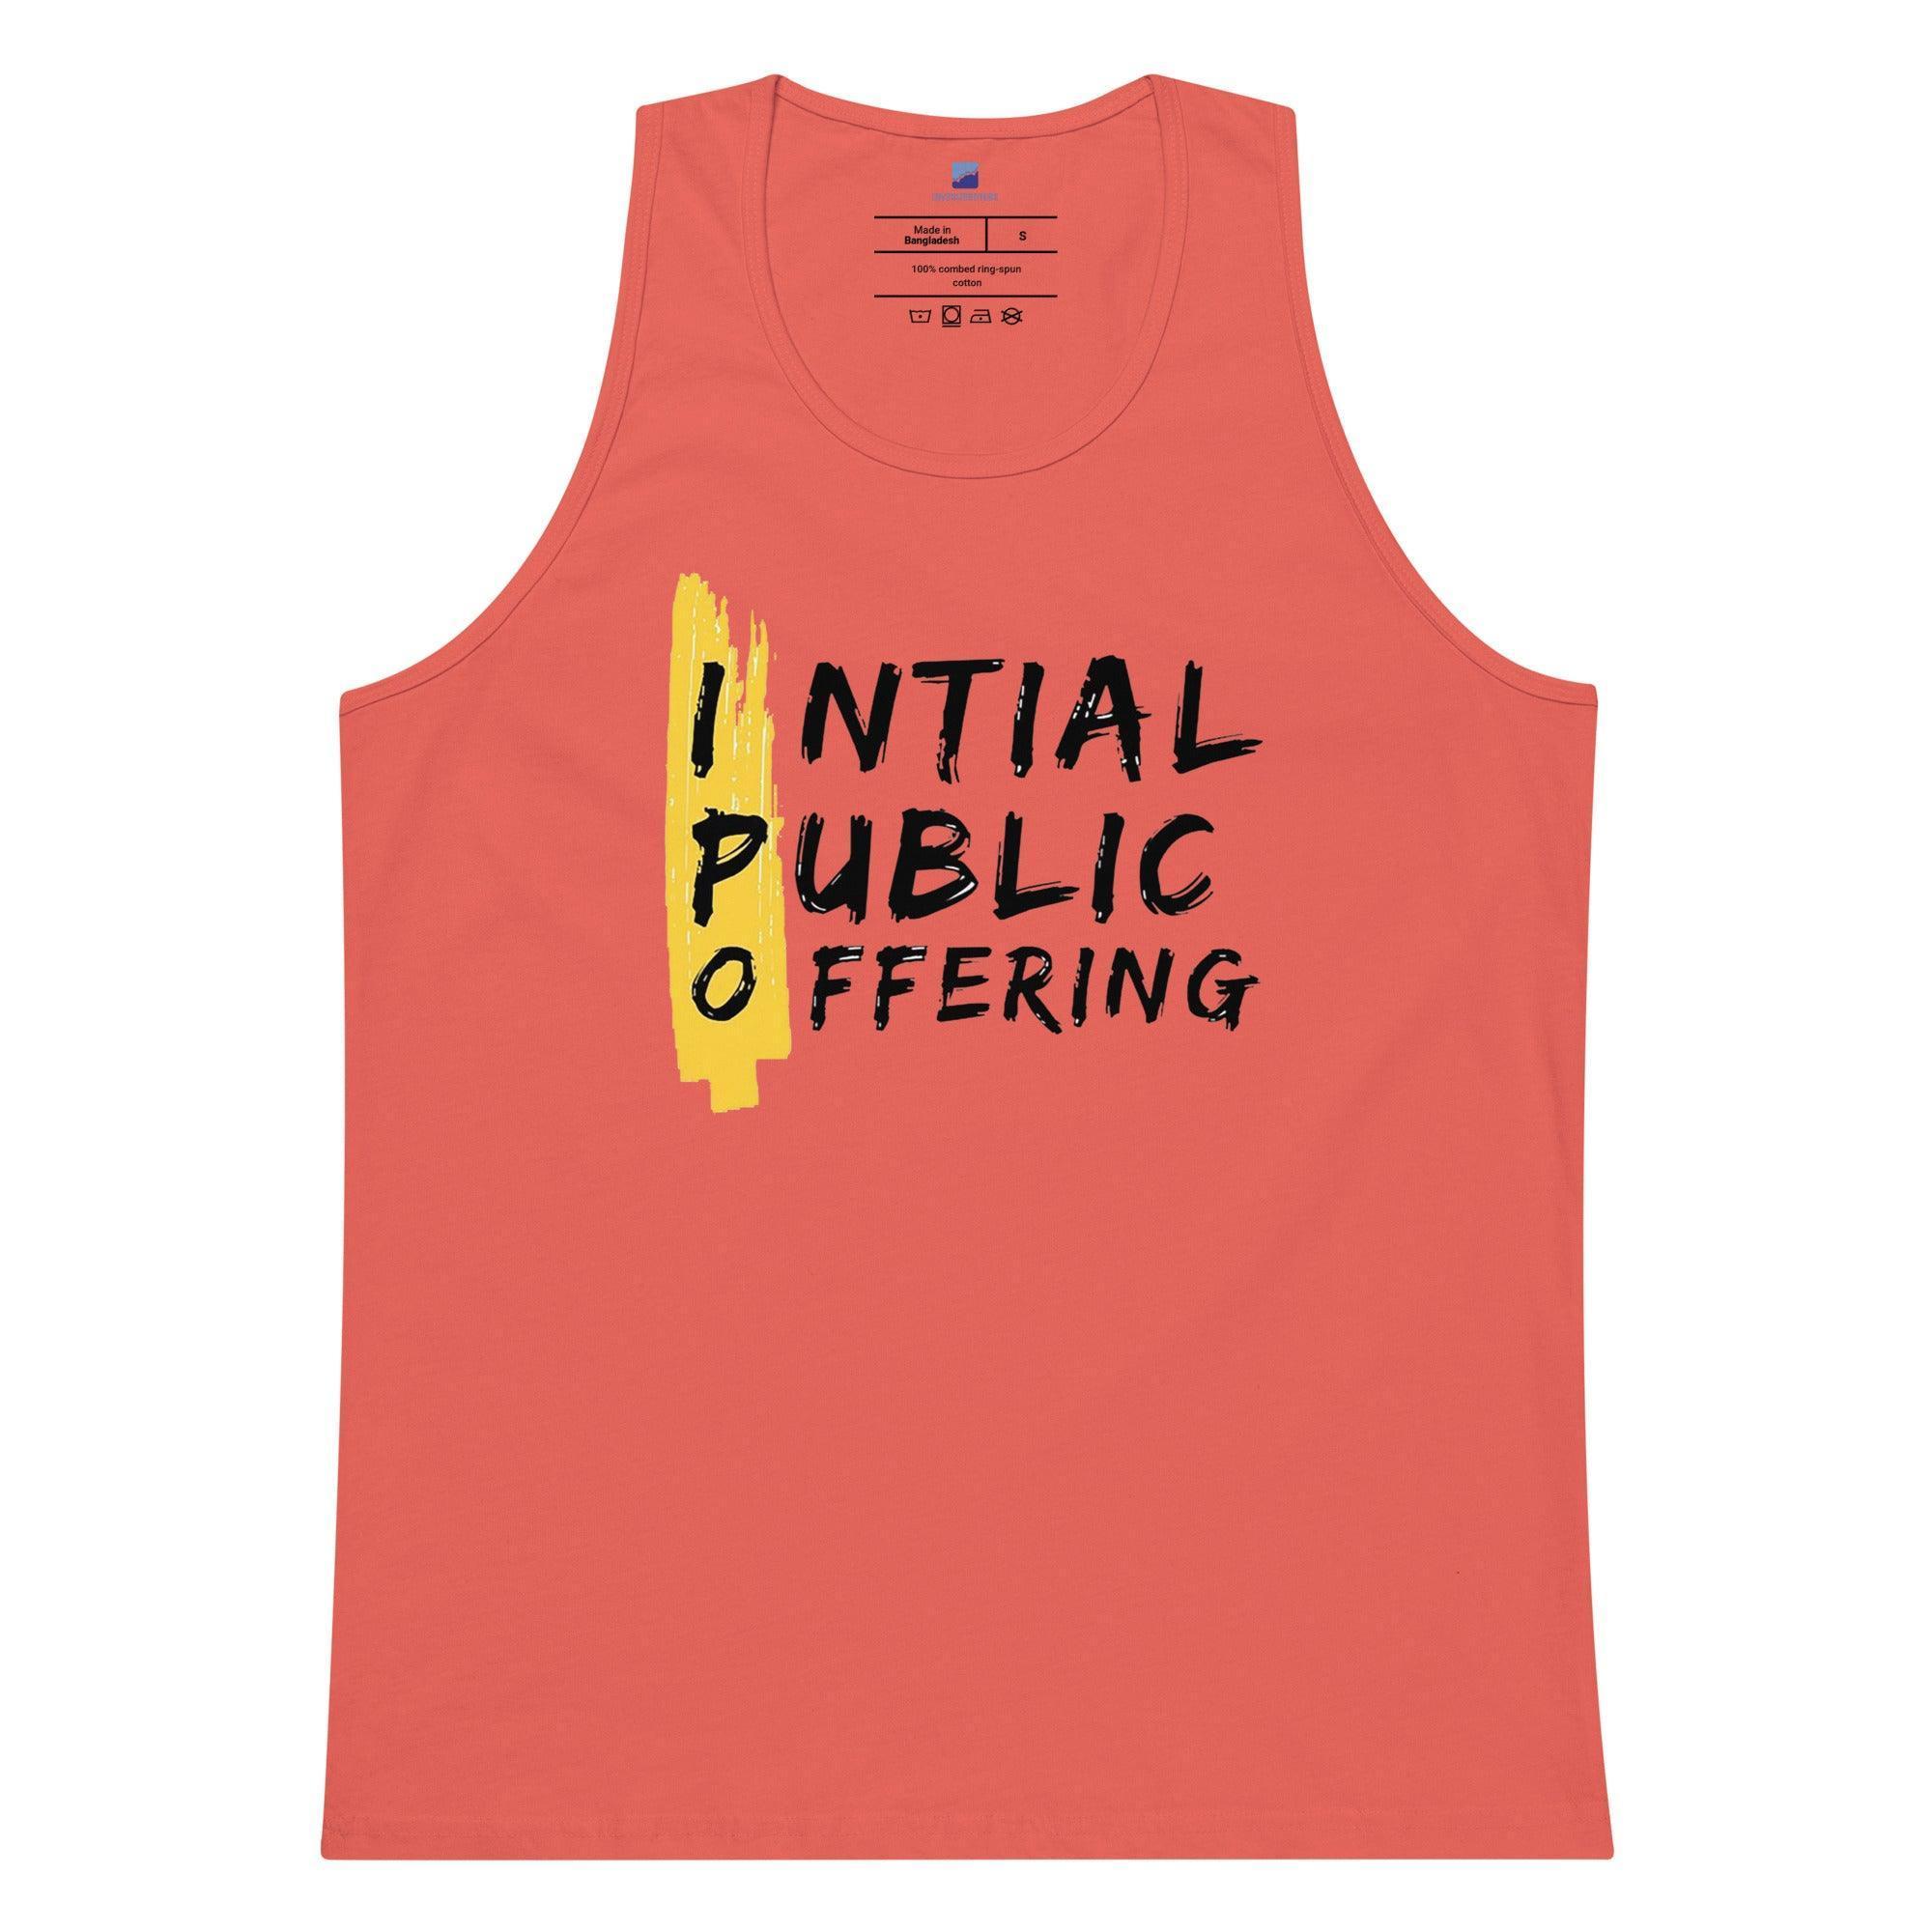 Initial Public Offering | IPO Tank Top - InvestmenTees